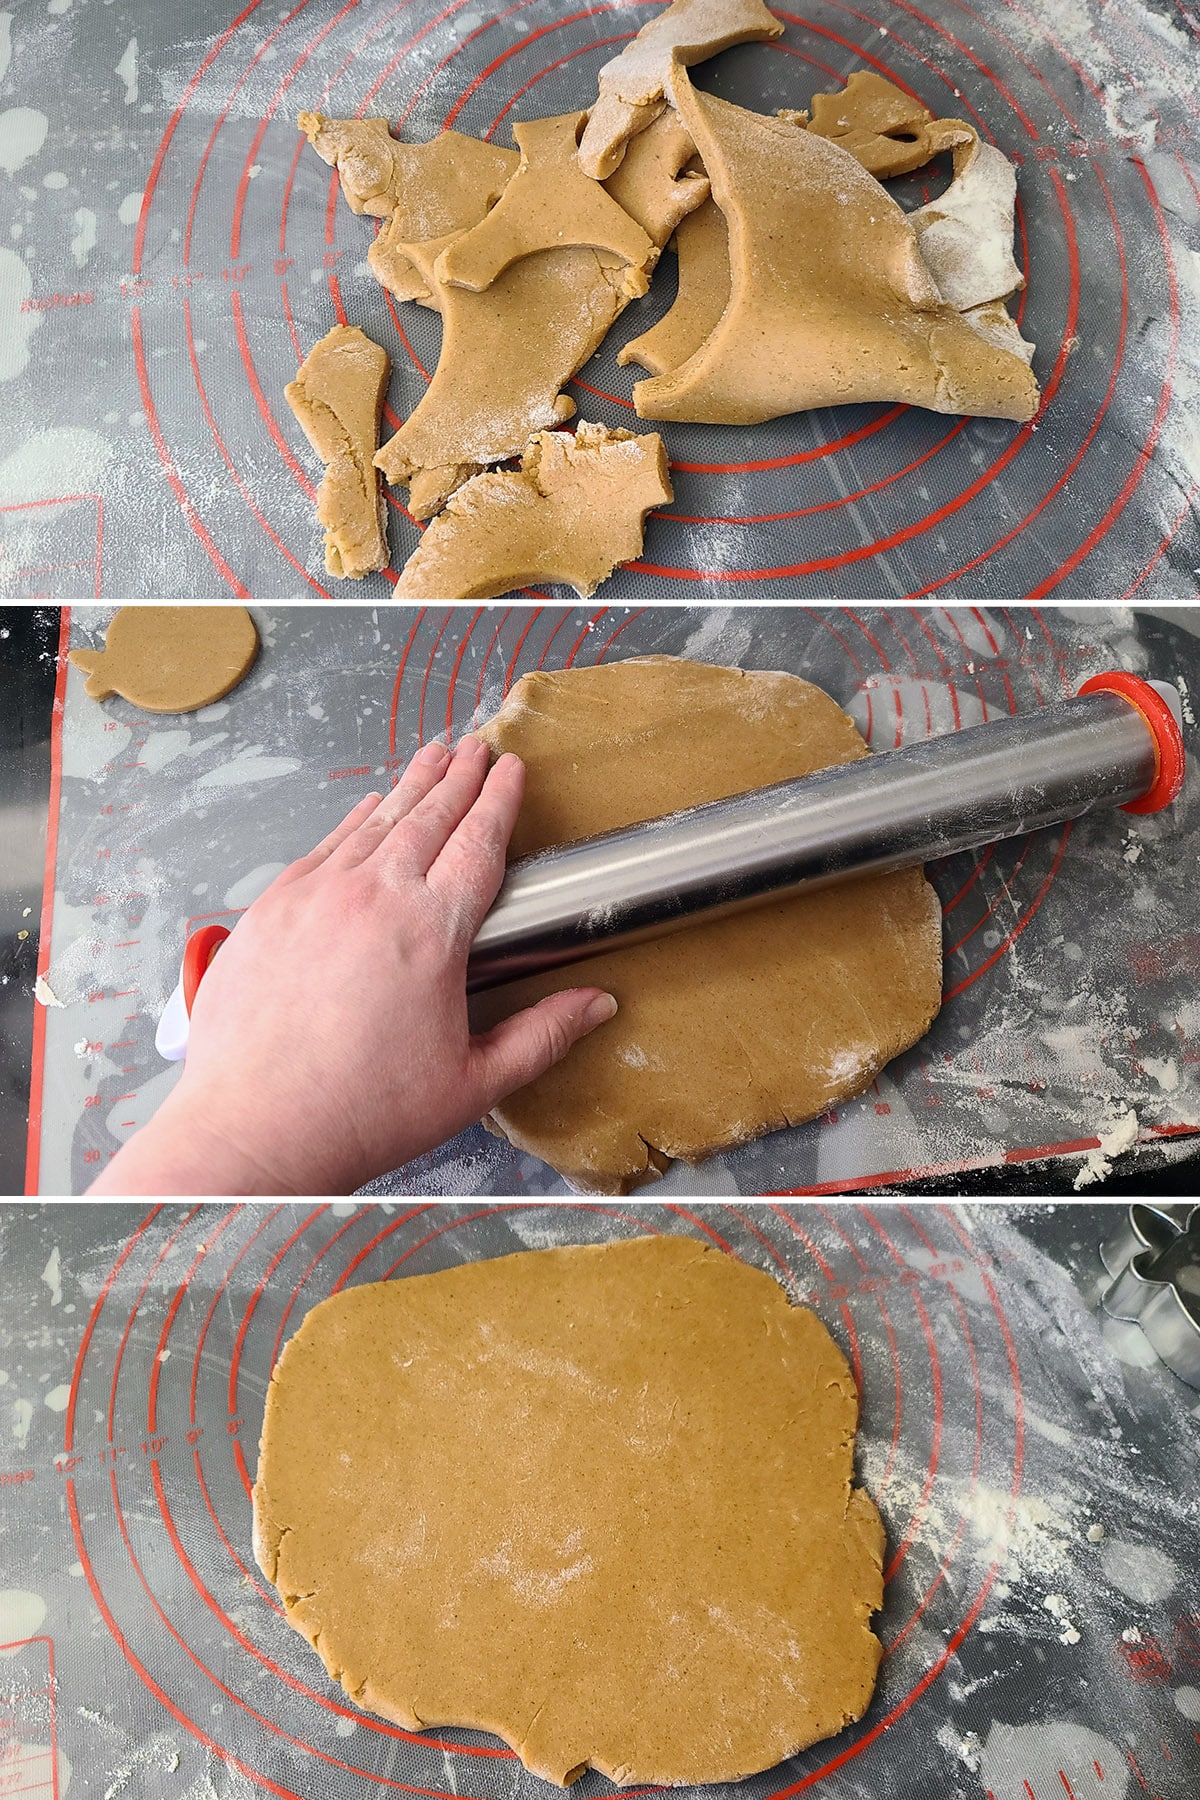 A 3 part image showing the dough scraps being brought back into a ball and rolled out.